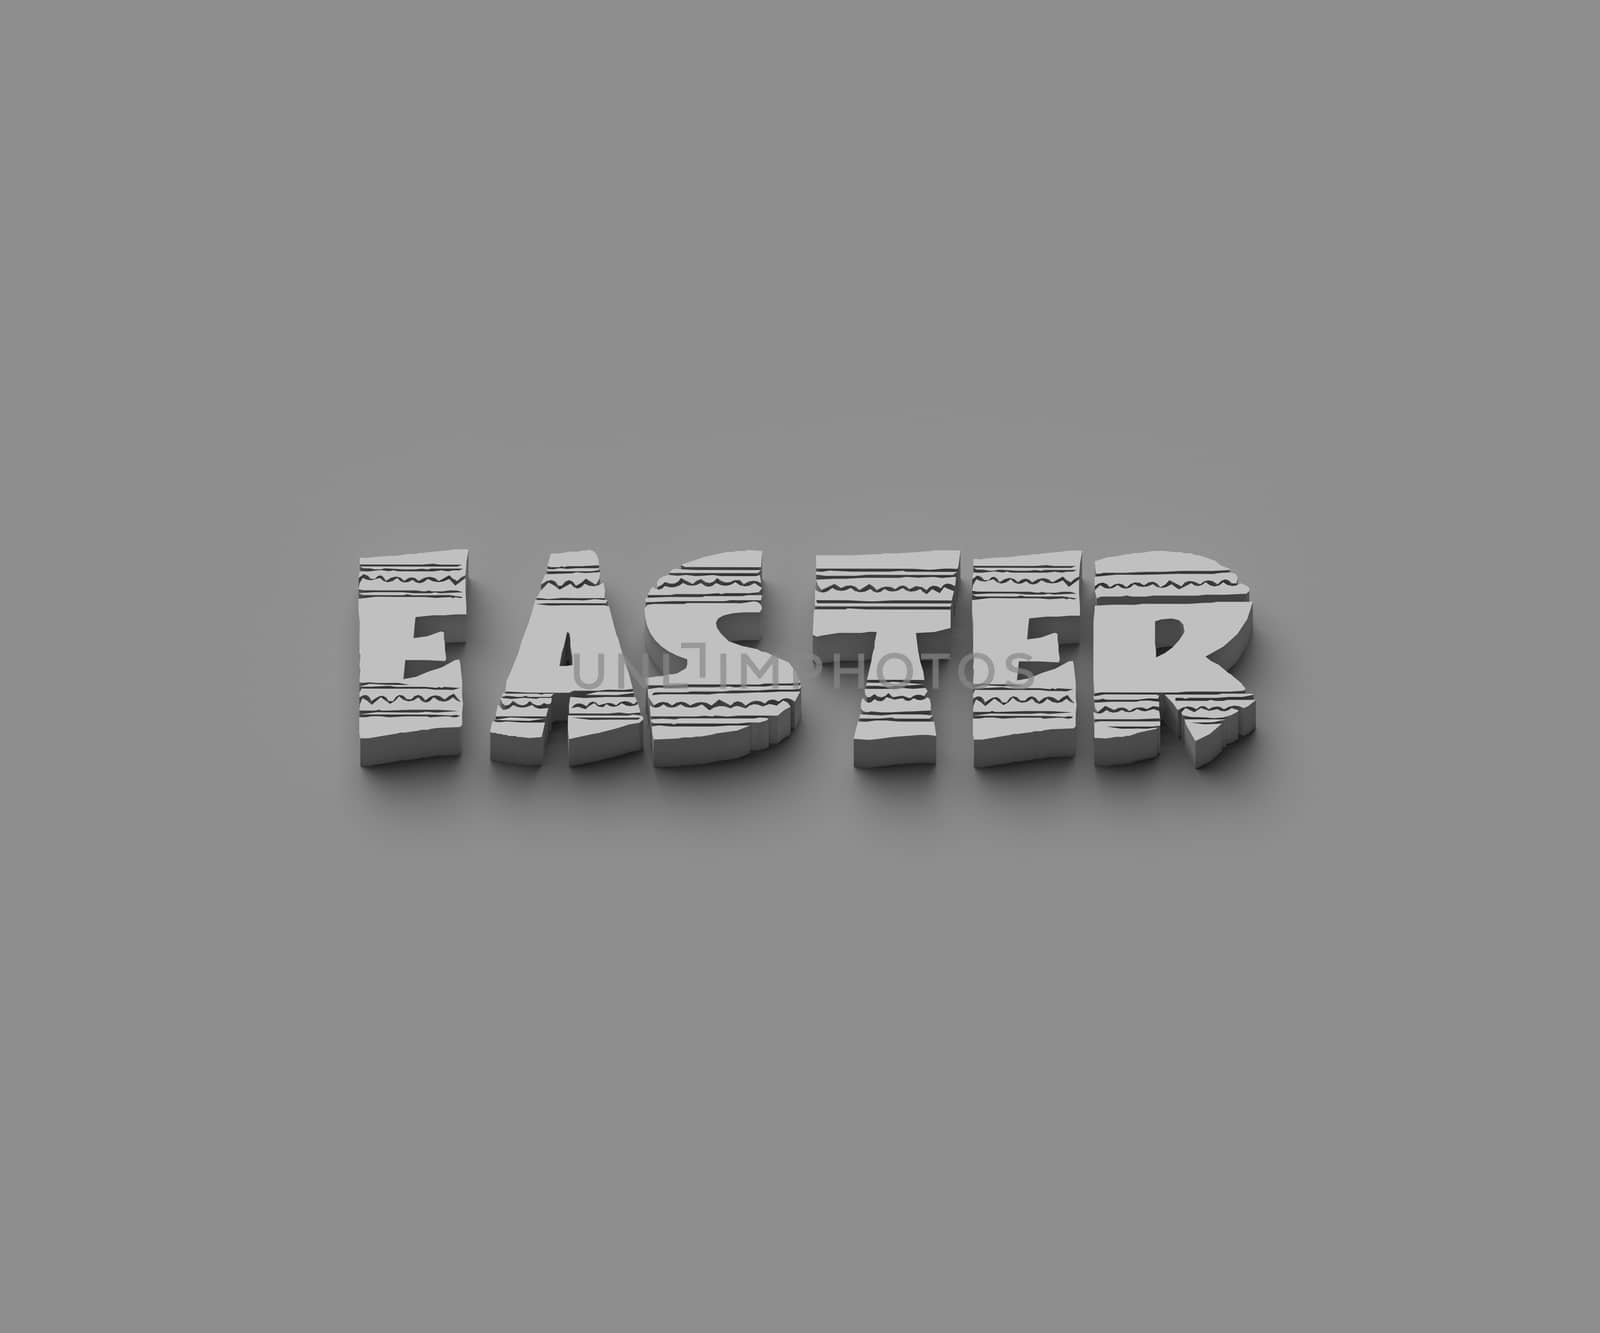 BLACK AND WHITE PHOTO OF 3D WORDS OF 'EASTER' ON PLAIN BACKGROUND